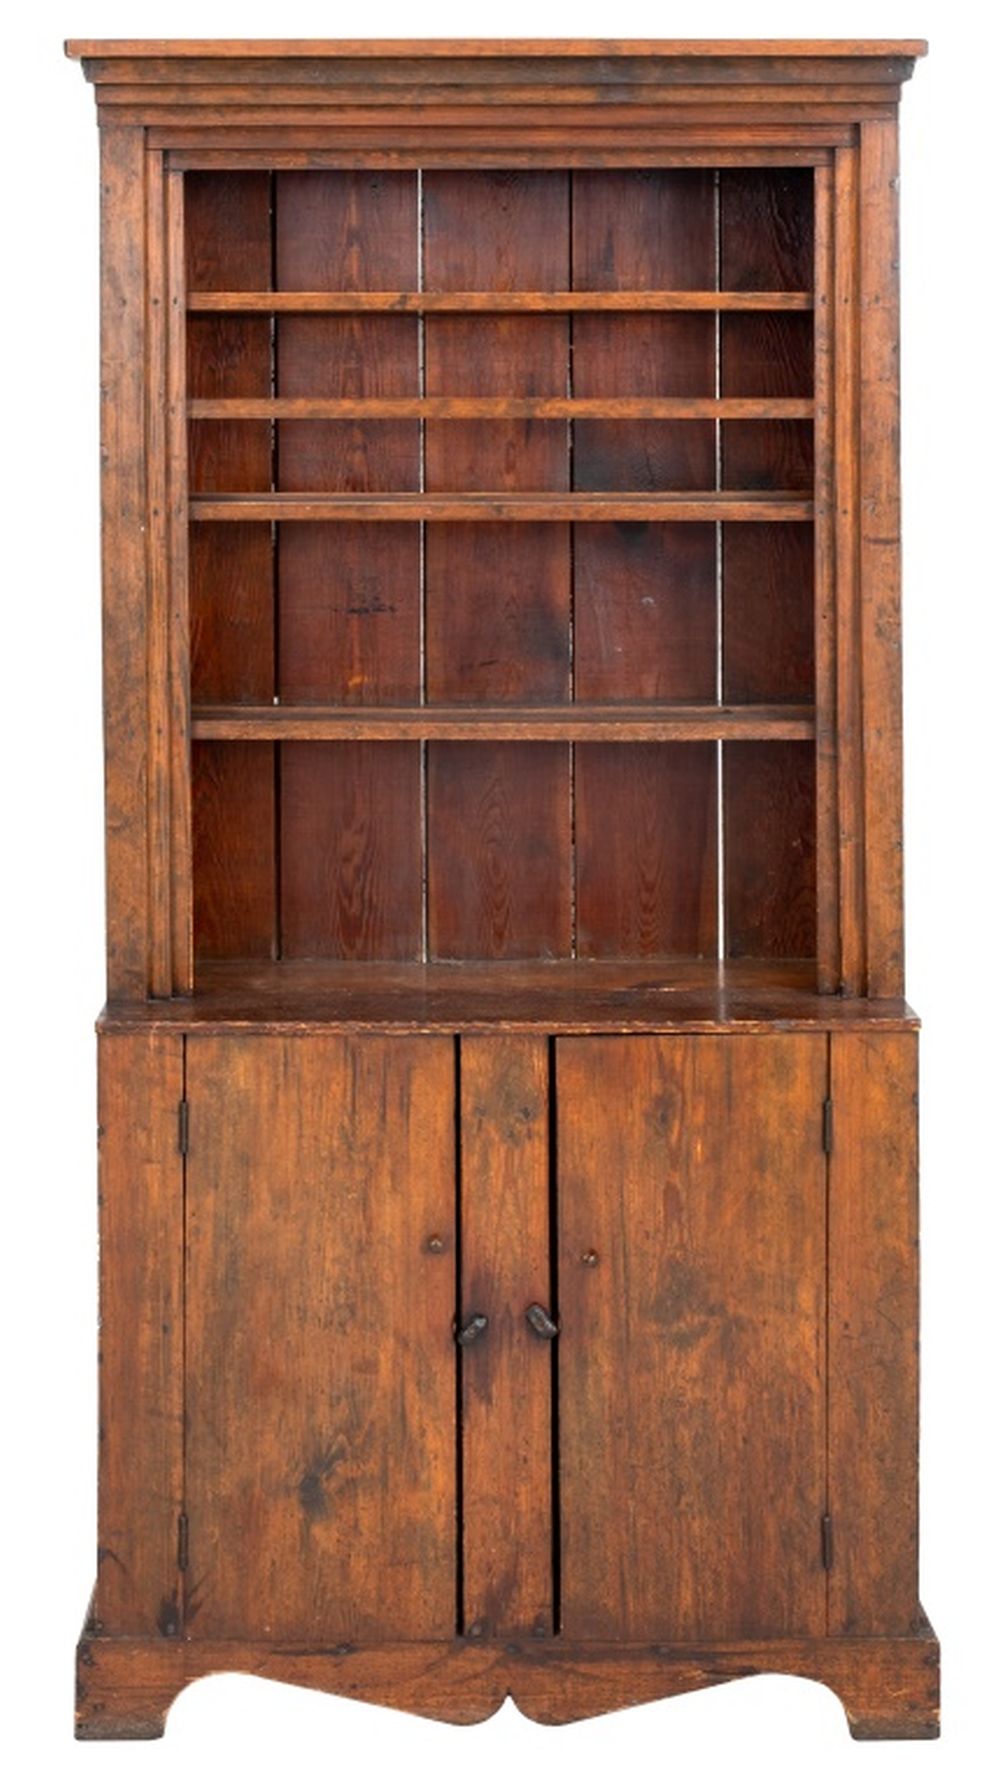 RUSTIC COUNTRY WOODEN HUTCH CABINET